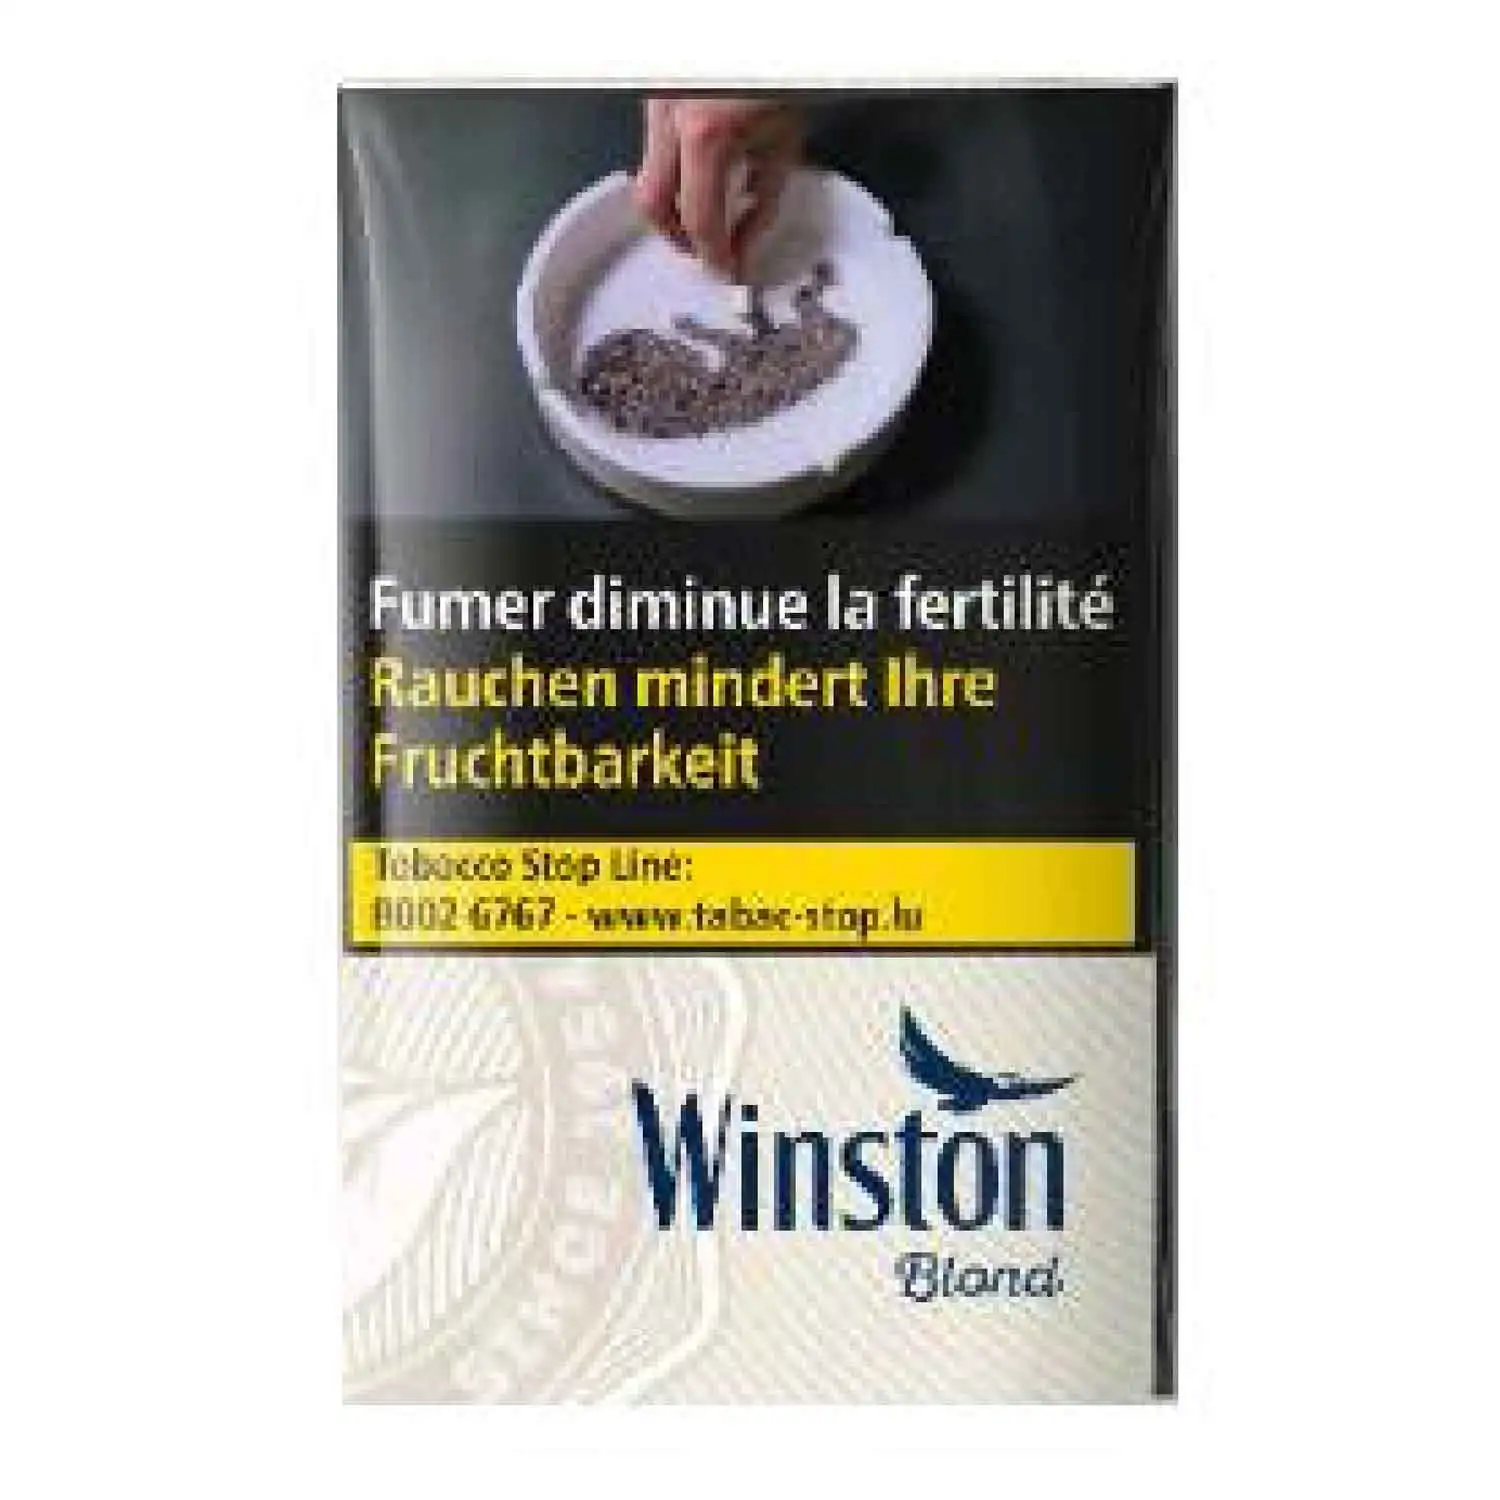 Winston blond 50g - Buy at Real Tobacco